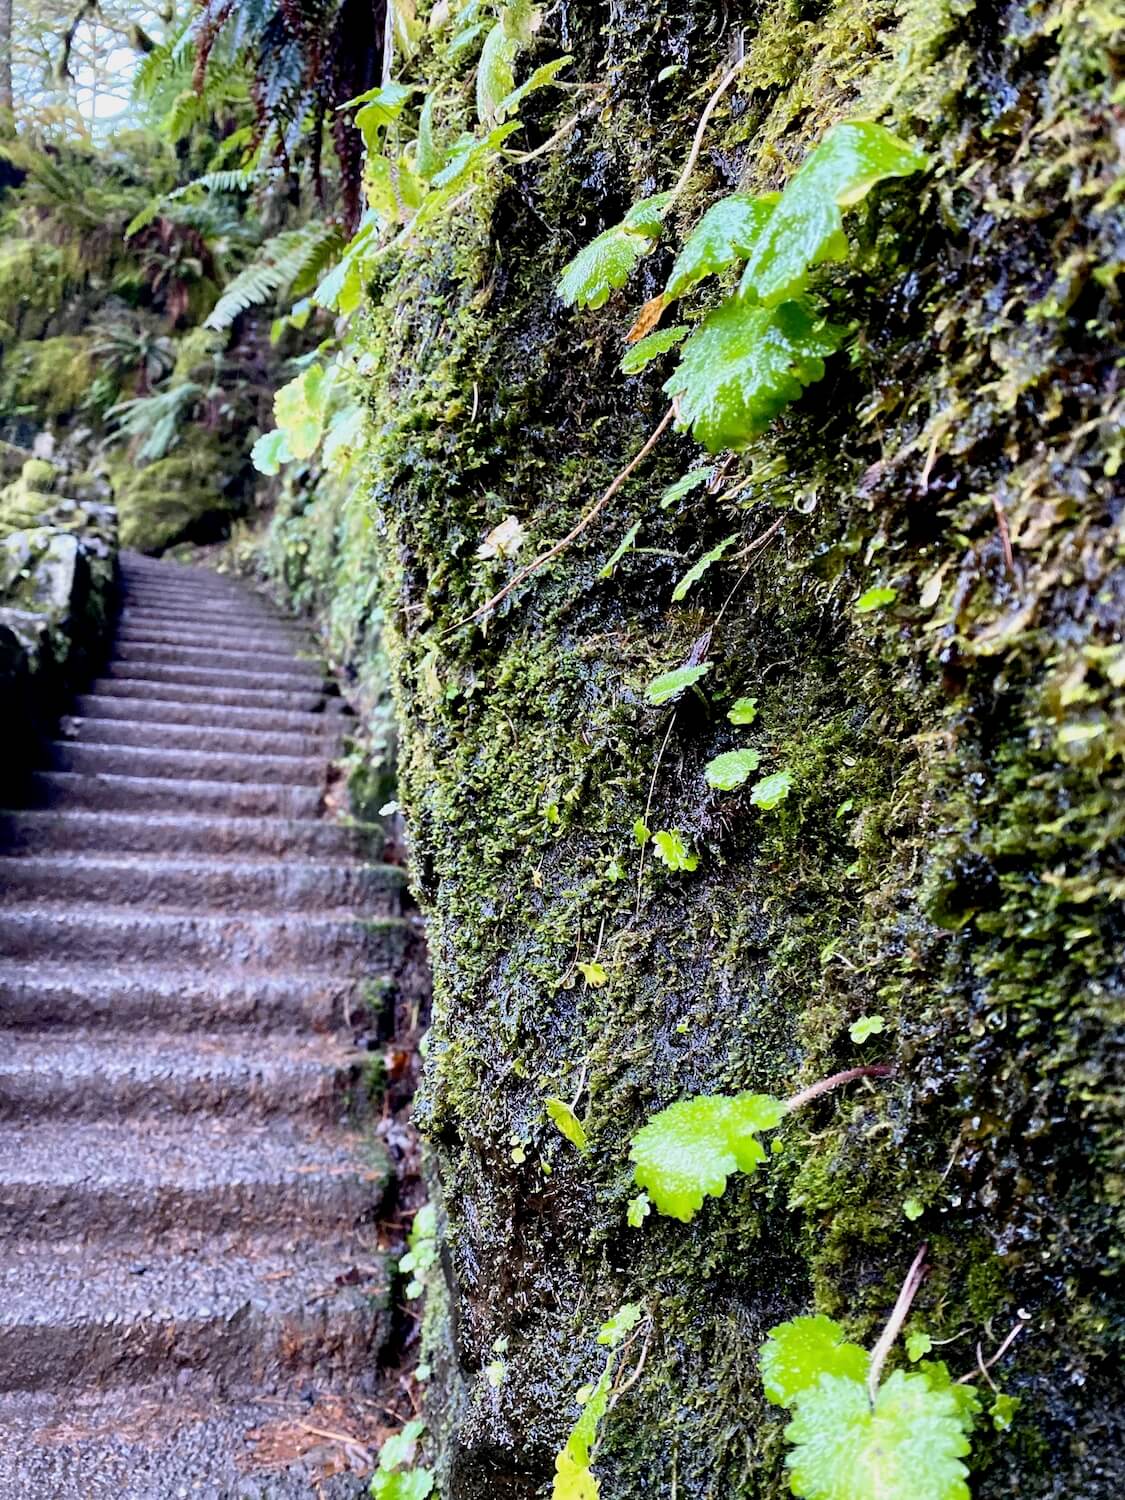 The trail of ten falls winds through a natural canyon formed by lava thousands of years ago.  As such, there are many steps to go from the ridge to the valley of the canyon where the ten features that make up Silver Creek Falls wow visitors.  Here, concrete steps rise up along side a rocky cliff covered in moss and other damp green plants, all dripping with water droplets. 